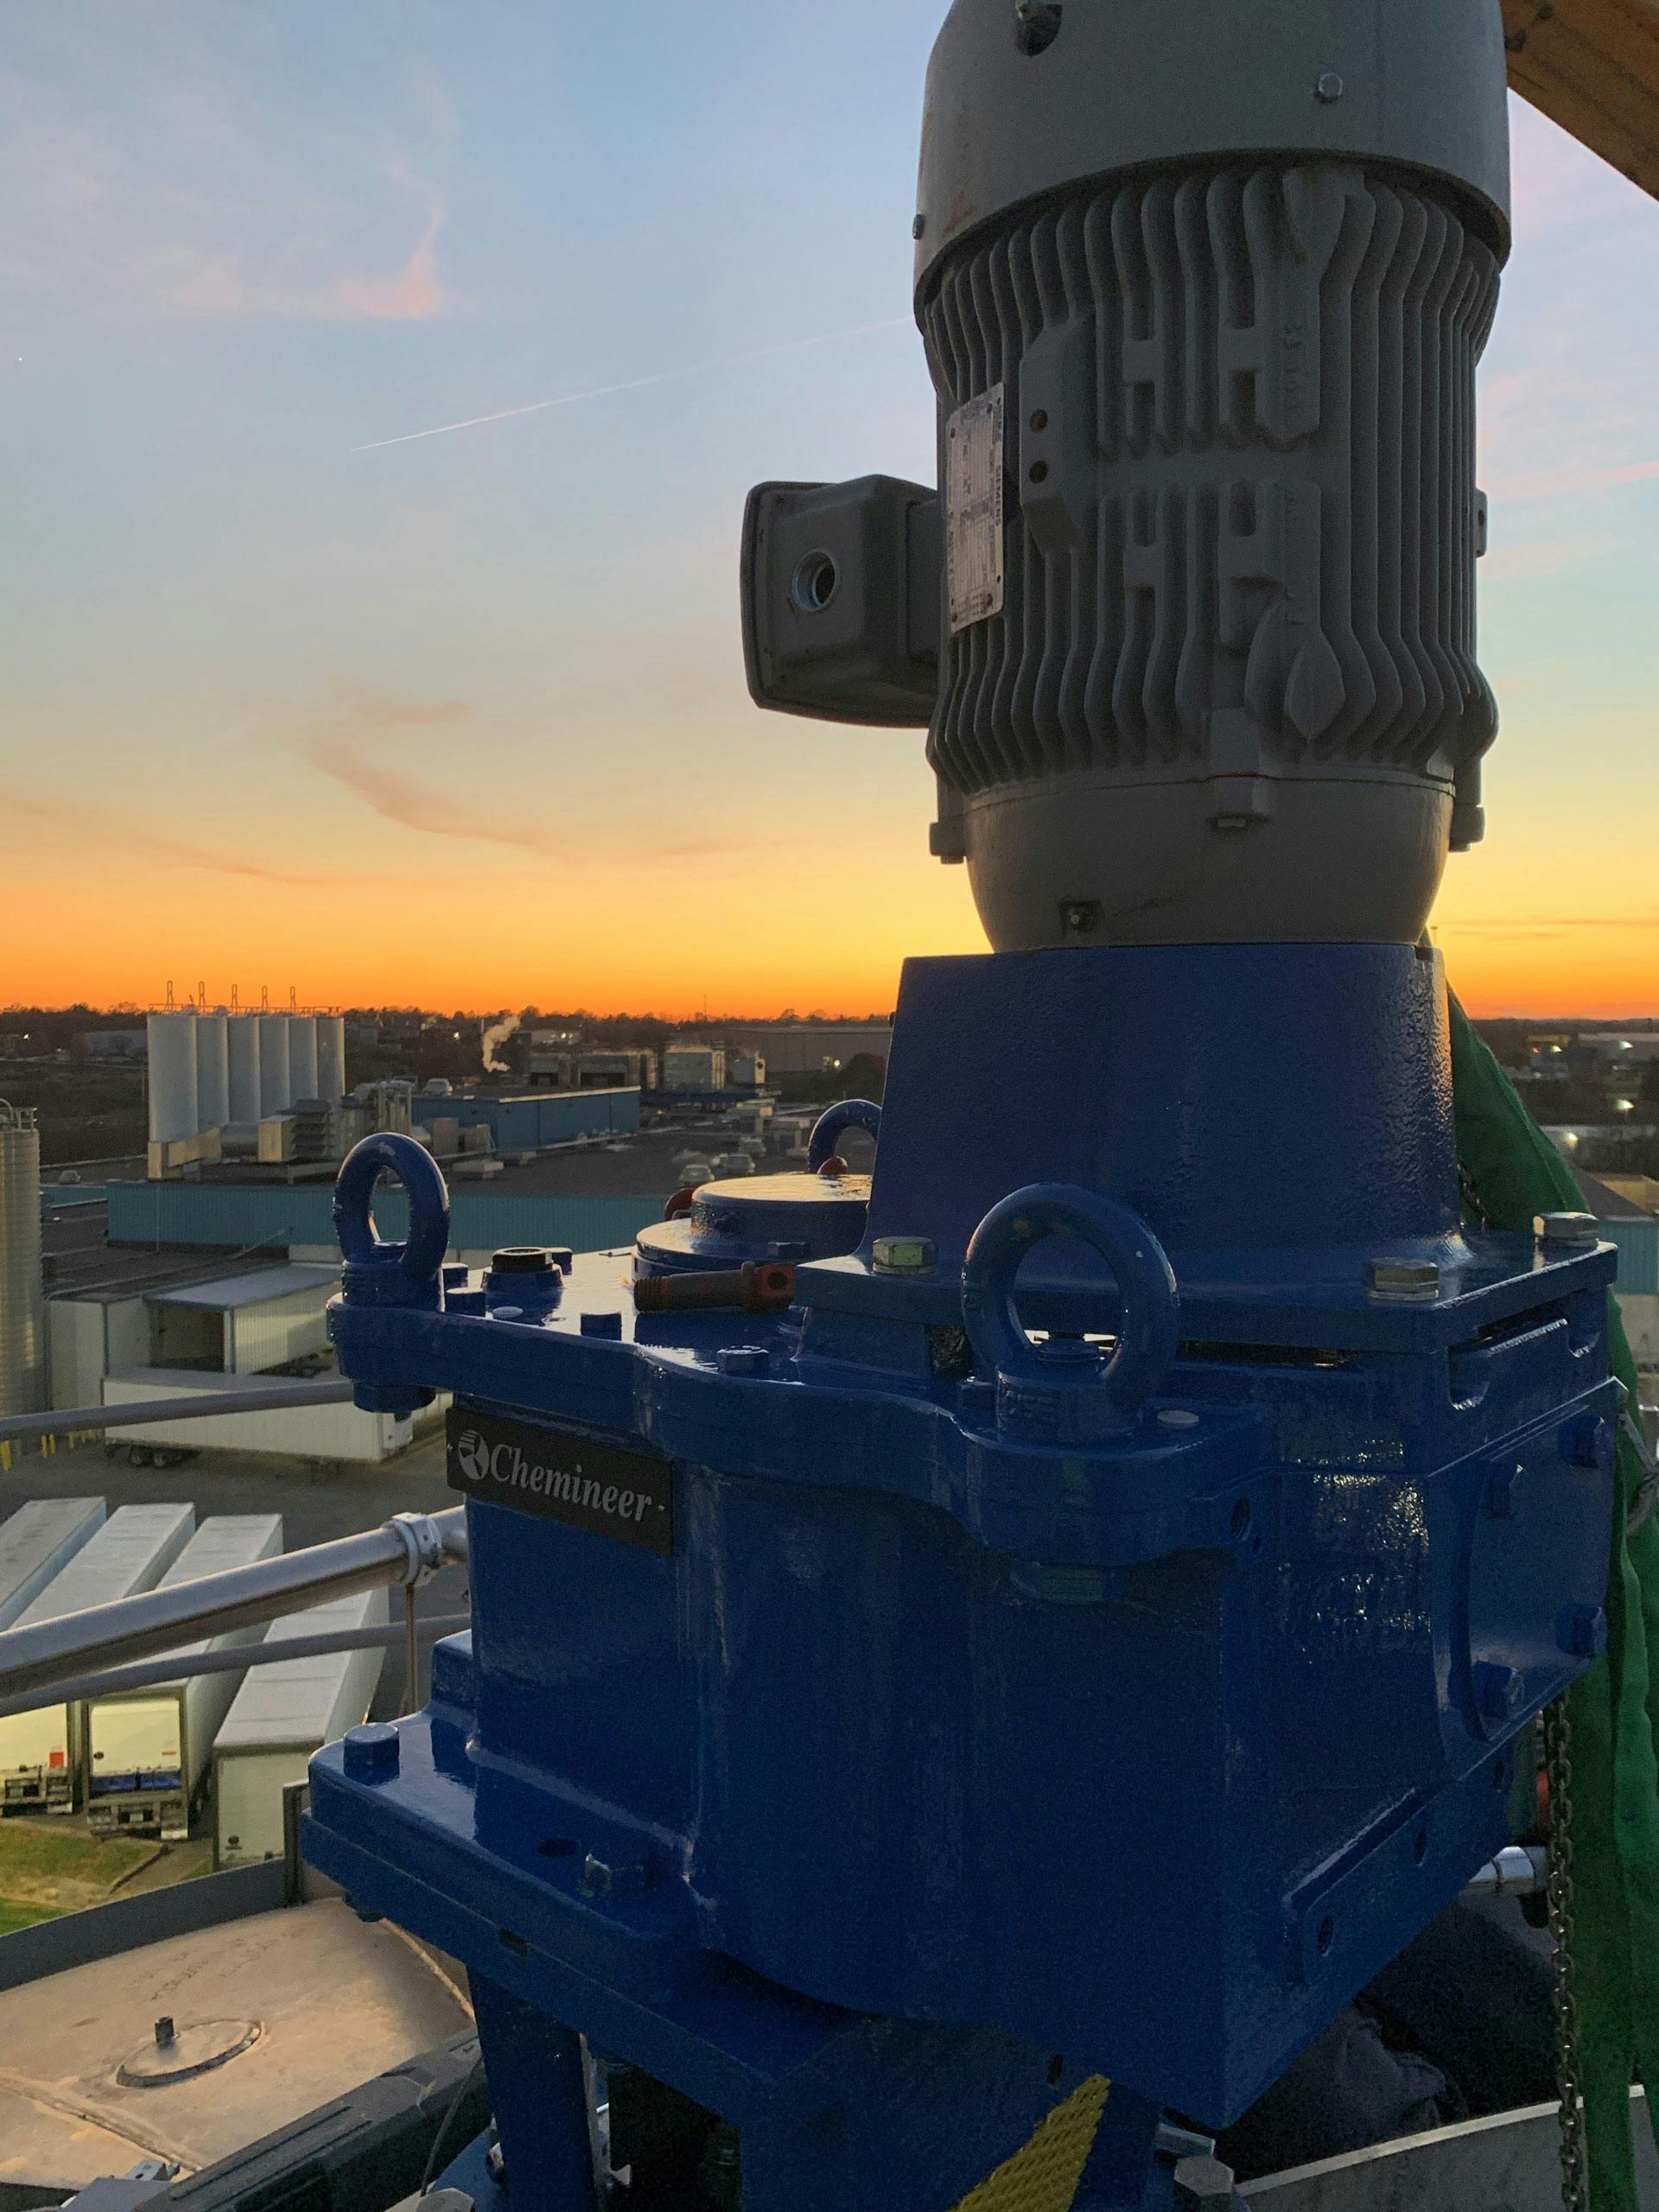 Upclose photo of a Chemineer mixer outside of a cacility, with a sunset in the background